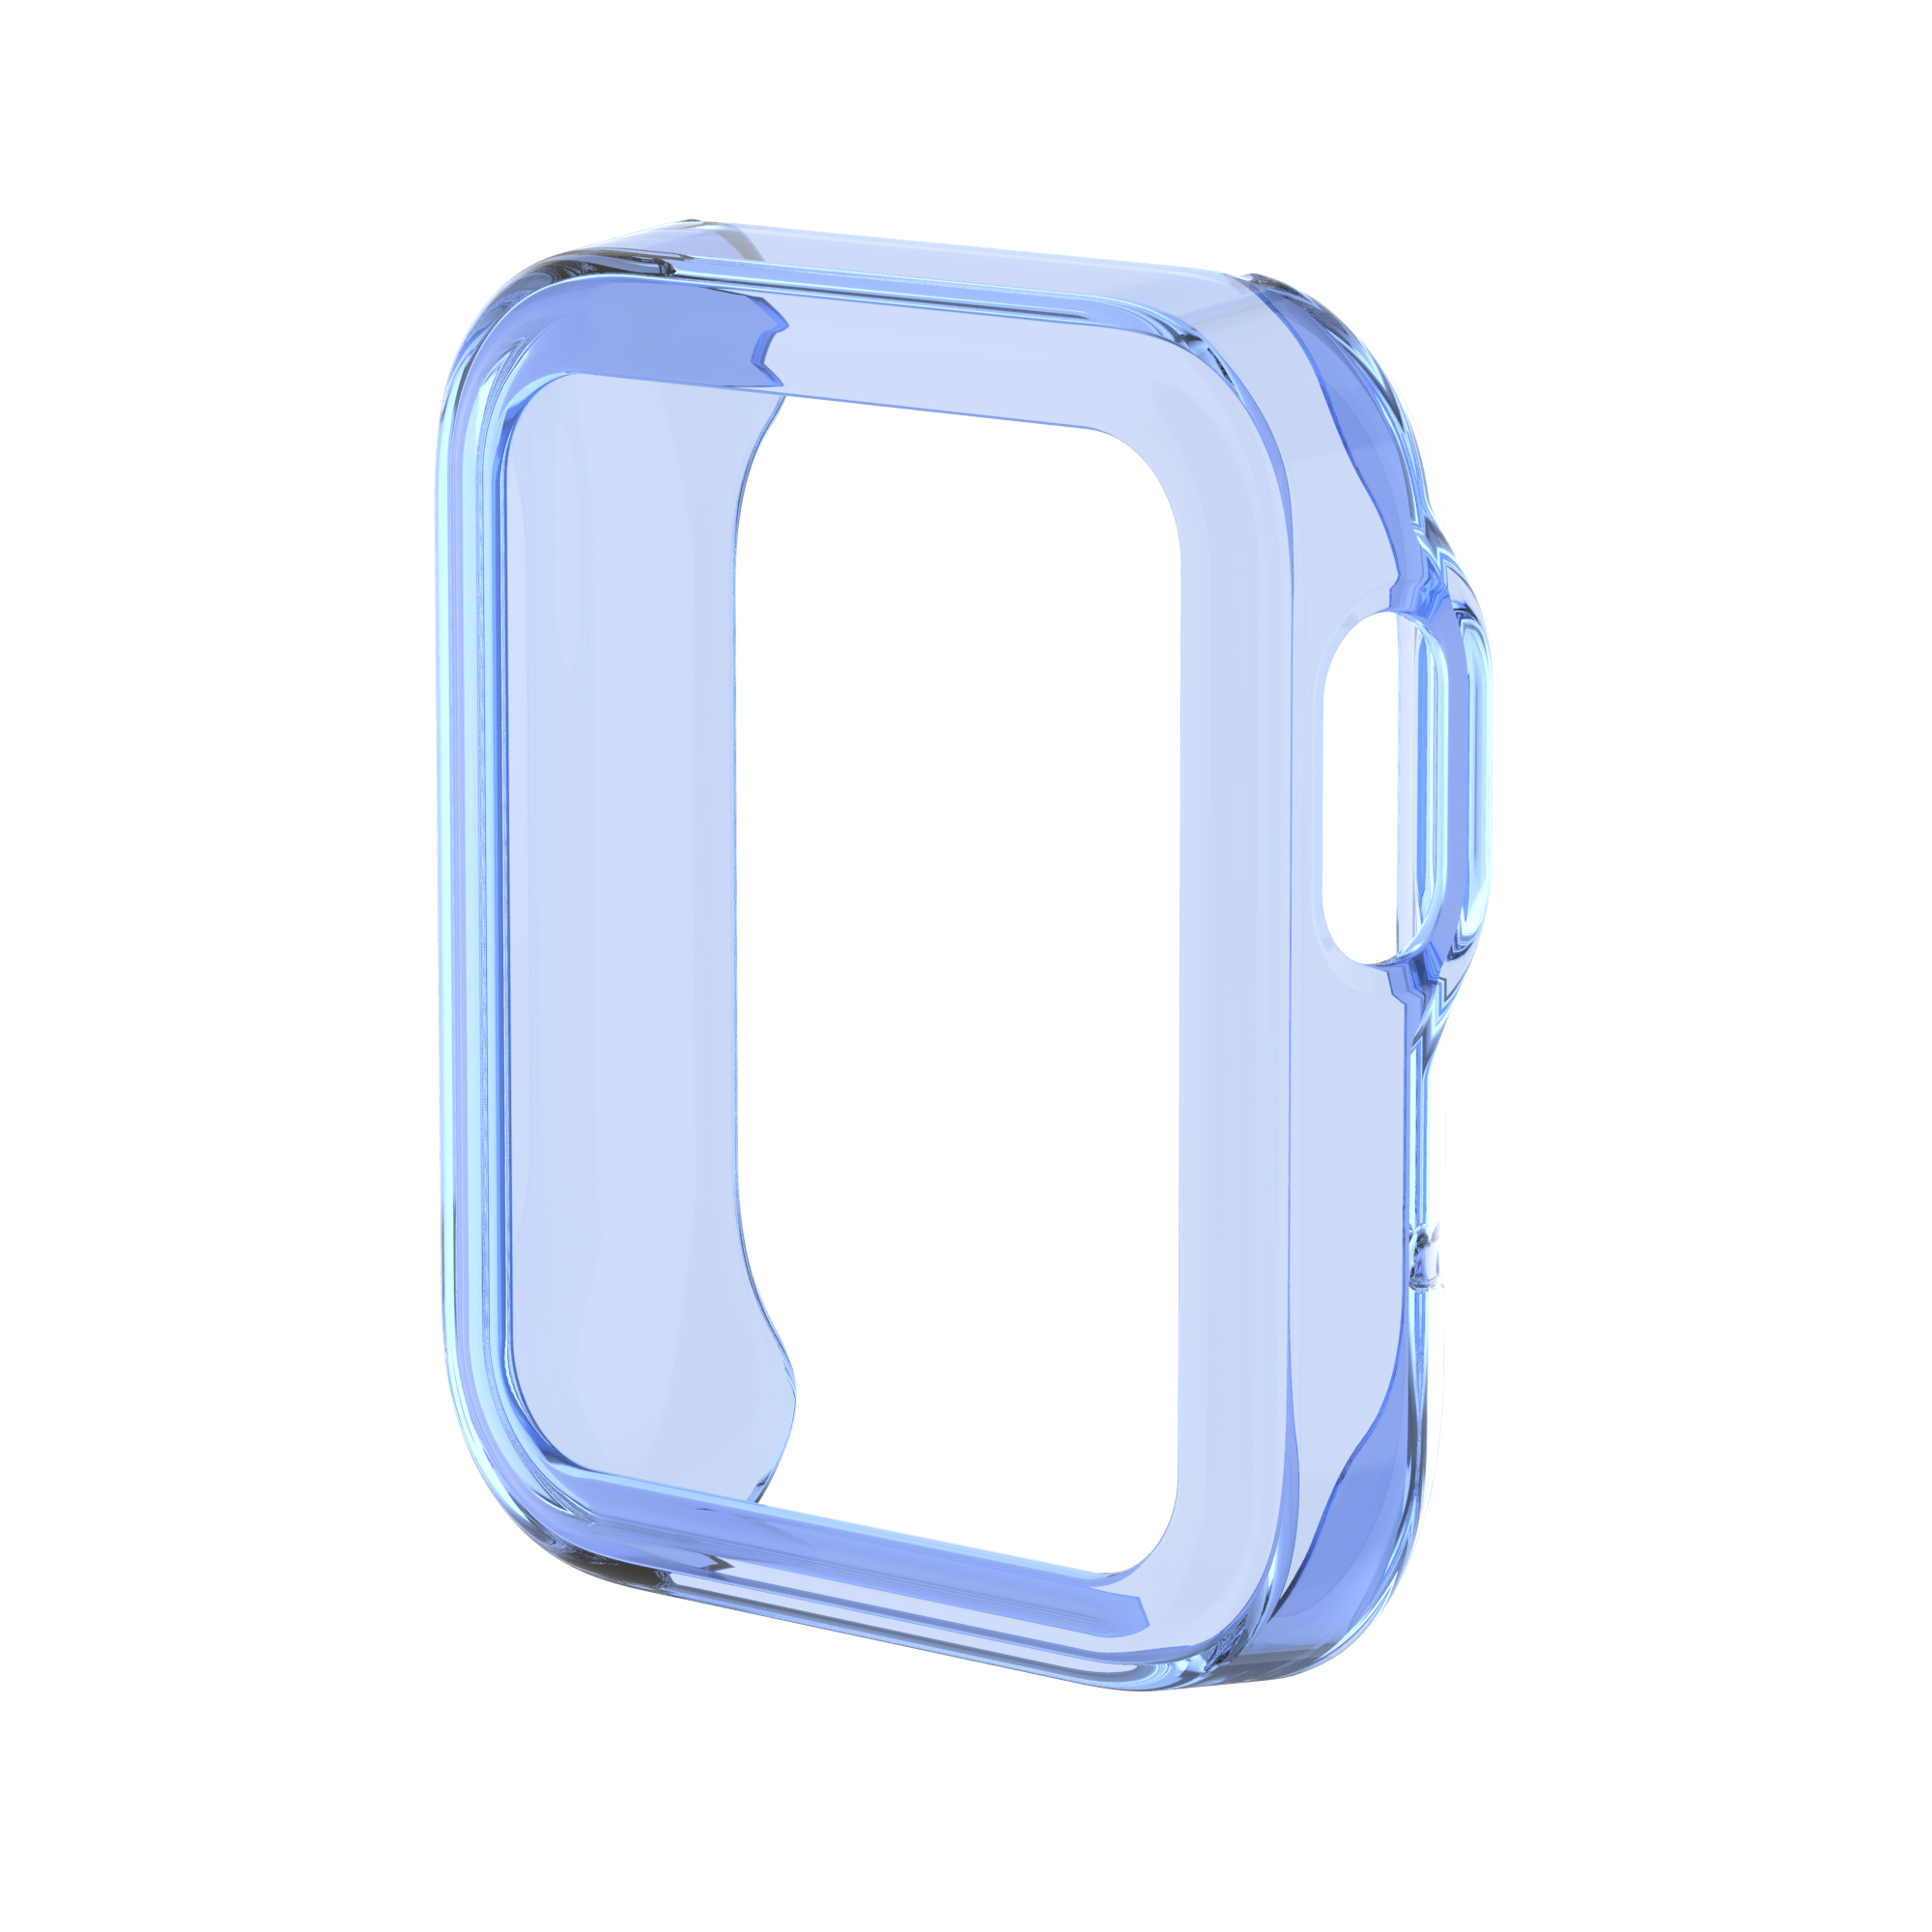 Bakeey-Transparent-TPU-Half-pack-Watch-Case-Cover-Watch-Protector-For-Xiaomi-Mi-Watch-Lite-1819481-12